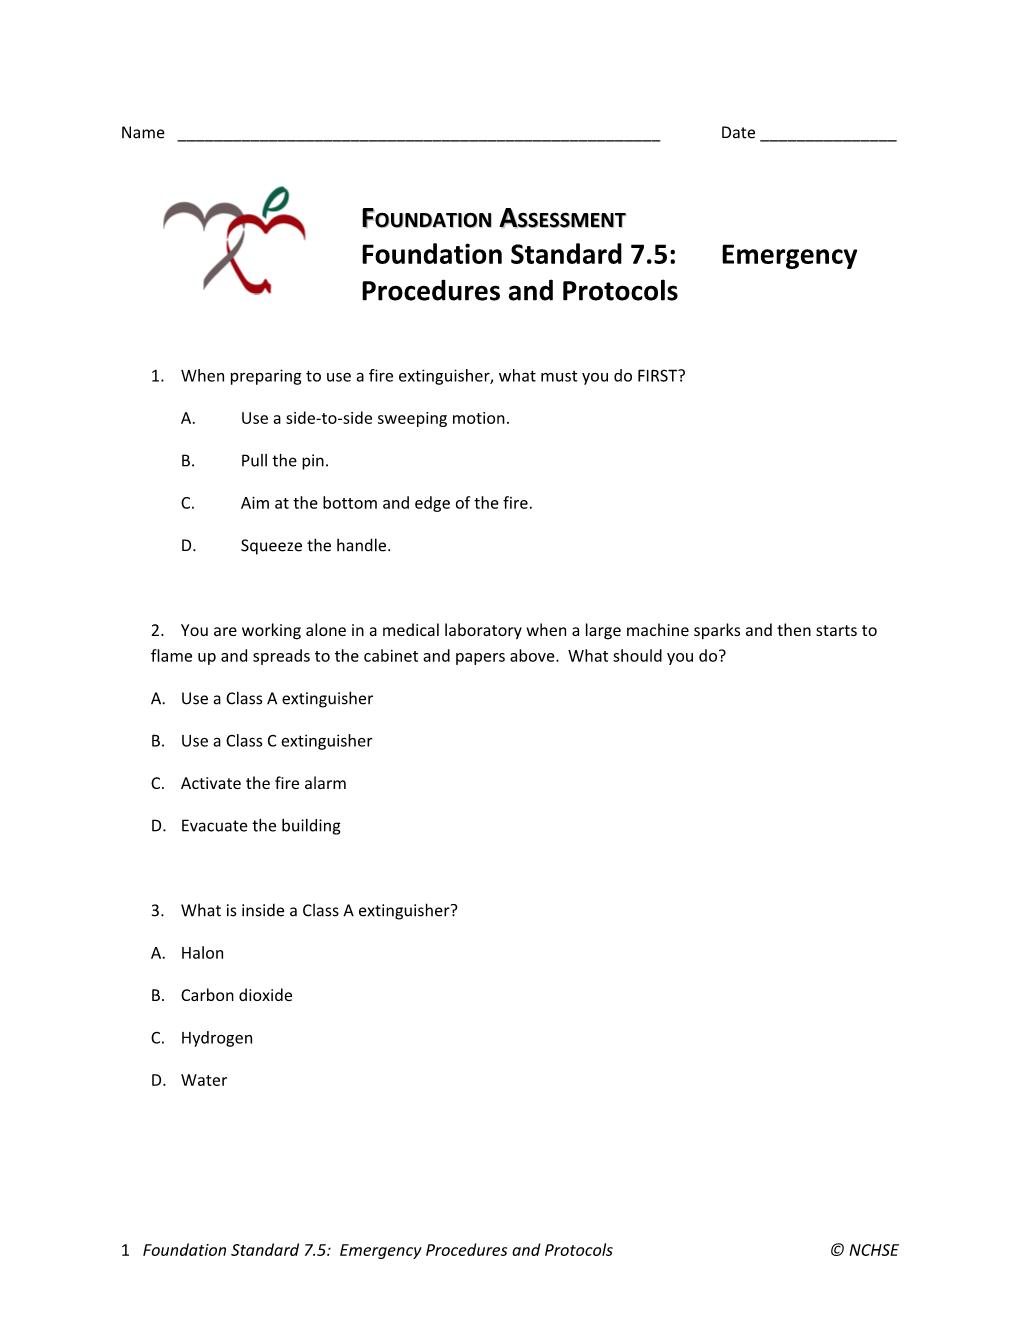 Foundation Standard 7.5:Emergency Procedures and Protocols